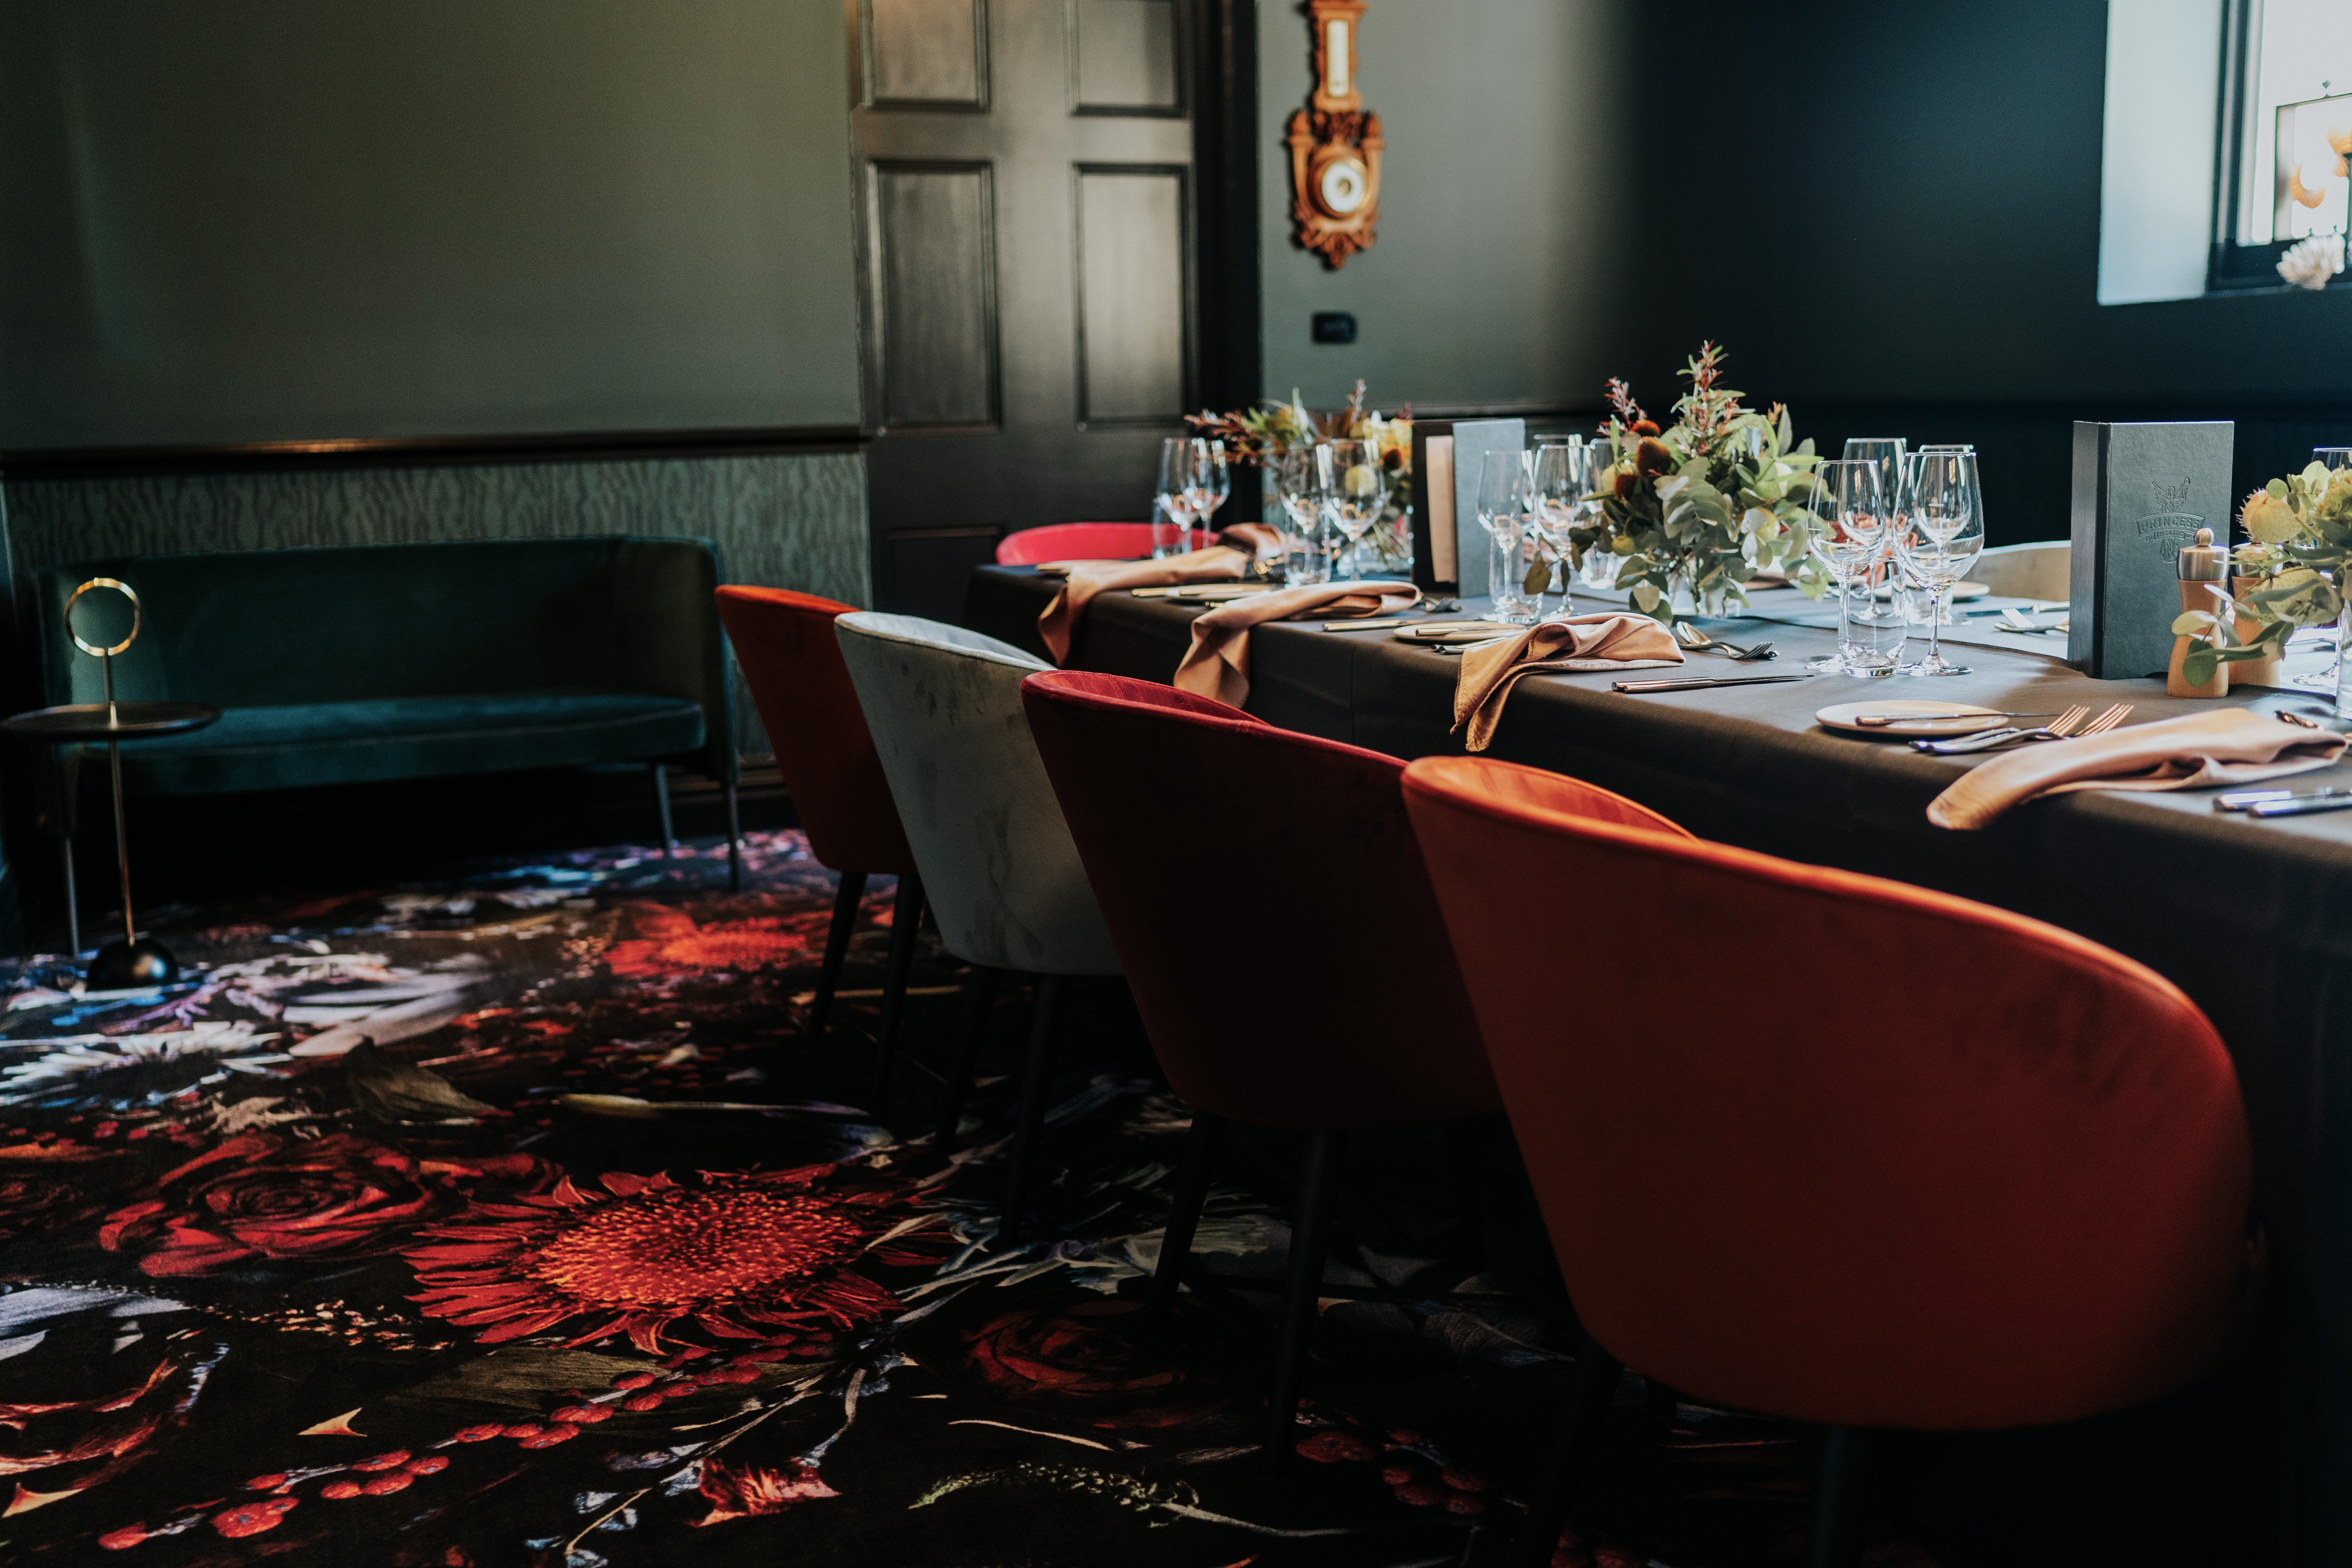 The Marriner Suite at the Princess Theatre designed by Geraldine Maher, Maher Design, featuring Fool's Paradise by Marcel Wanders for Moooi Carpets. Photo c/o Marriner Group. 